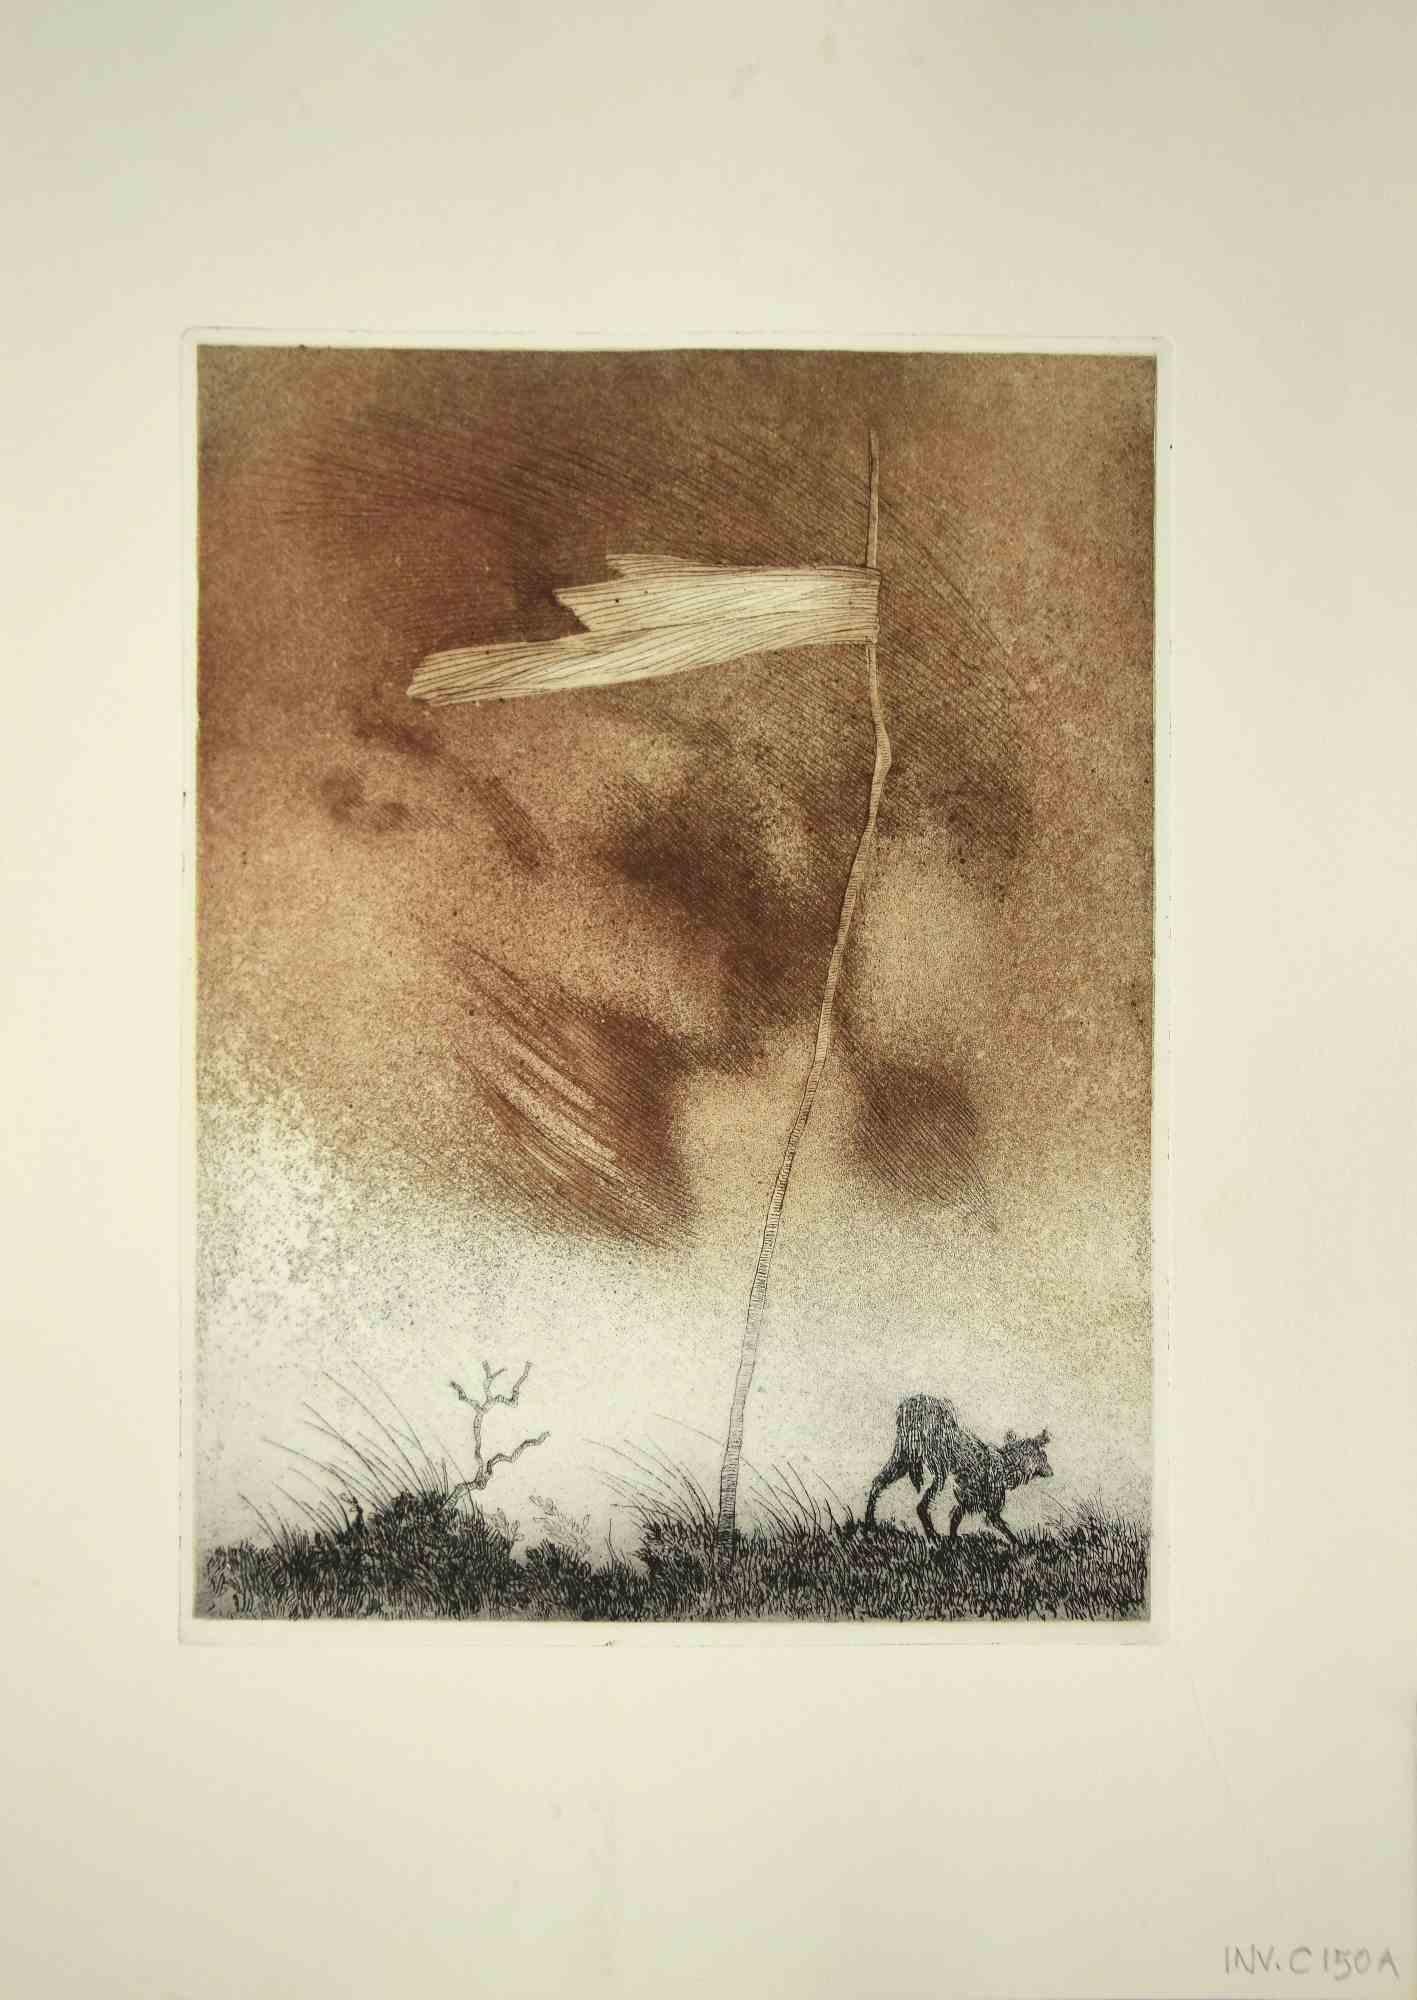 The Boundary is an etching print realized by Leo Guida in the 1970s.

Good condition.

Leo Guida  (1992 - 2017). Sensitive to current issues, artistic movements and historical techniques, Leo Guida has been able to weave with many generations of